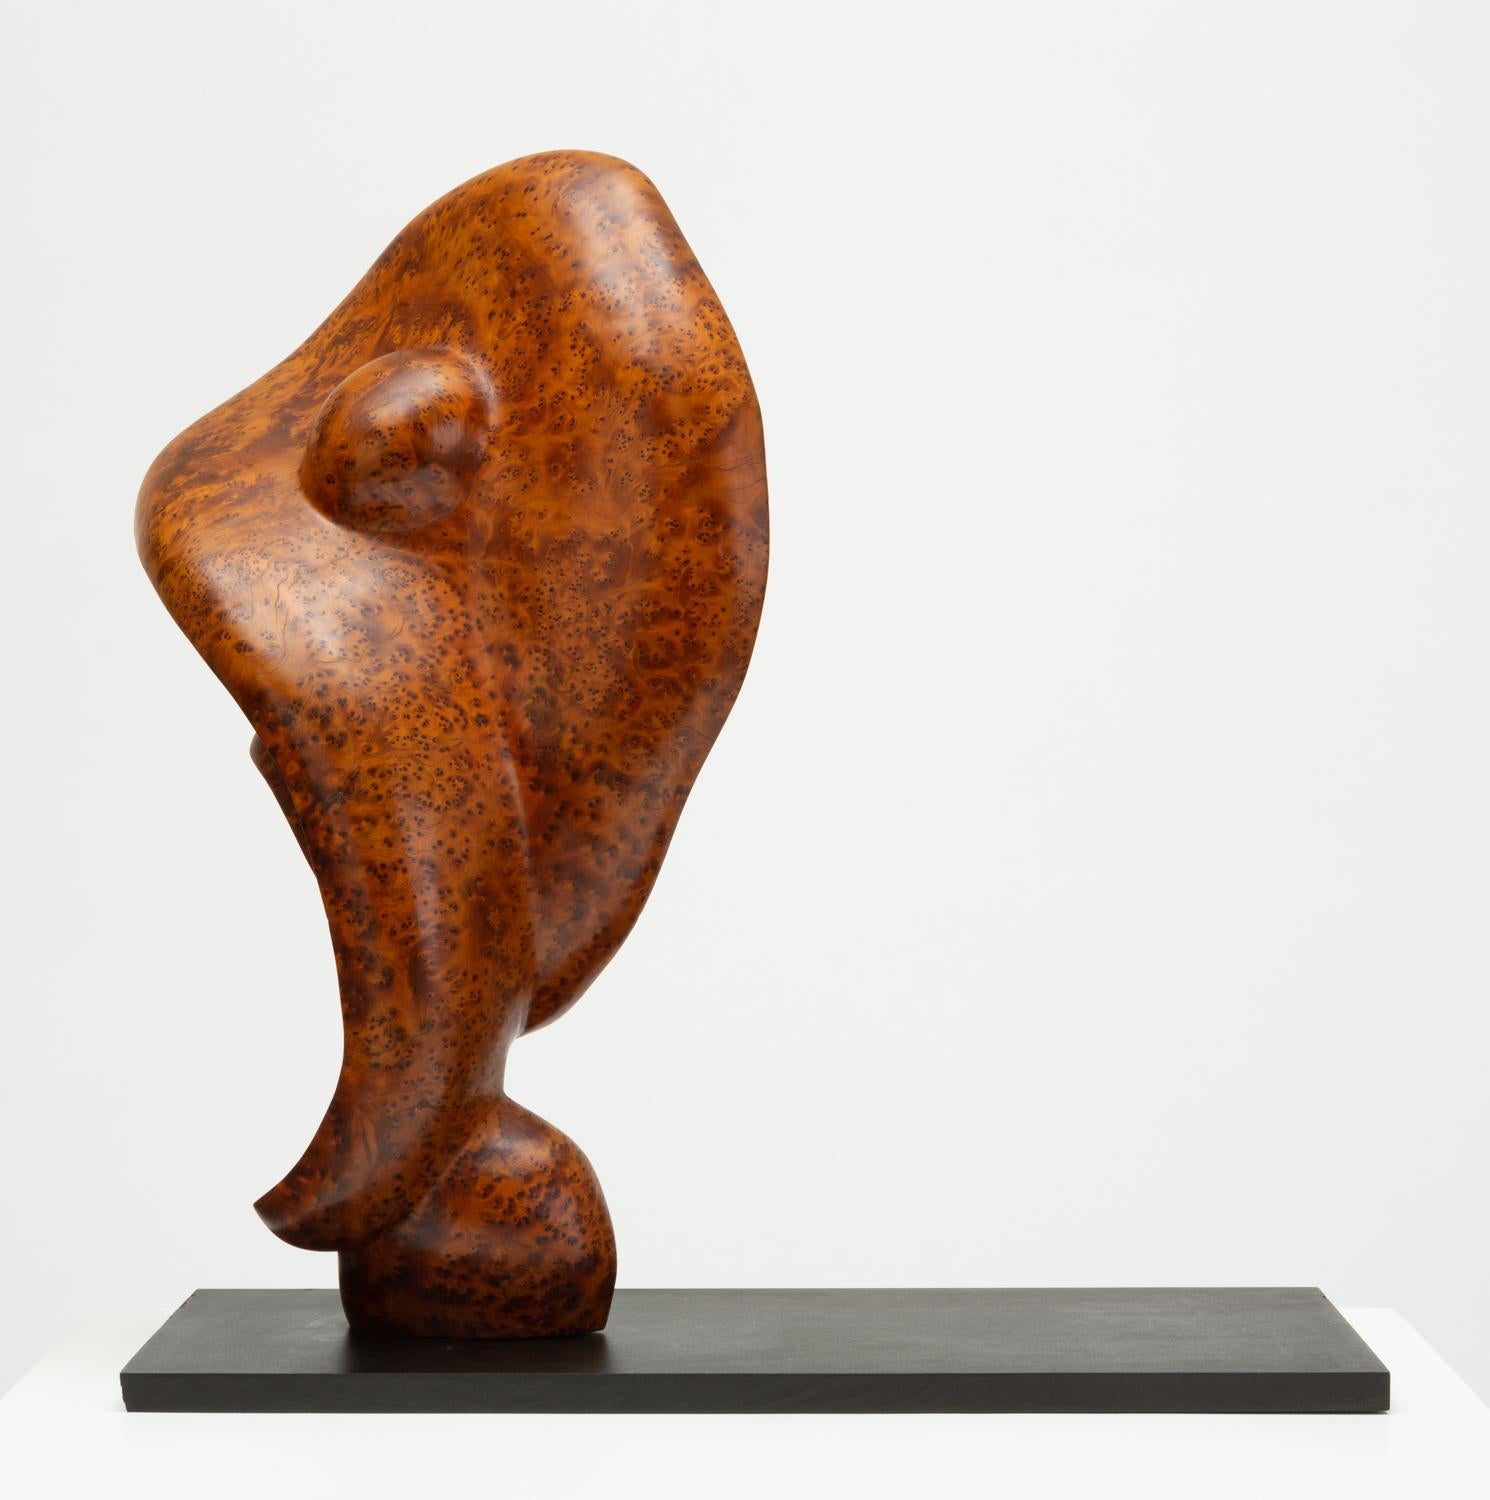 A unique, smoothly carved biomorphic sculpture in a highly figured bird's-eye mahogany, mounted on a thick base of black laminate. The stylized irregularity of the curved form offers a unique viewing experience from every vantage point; it